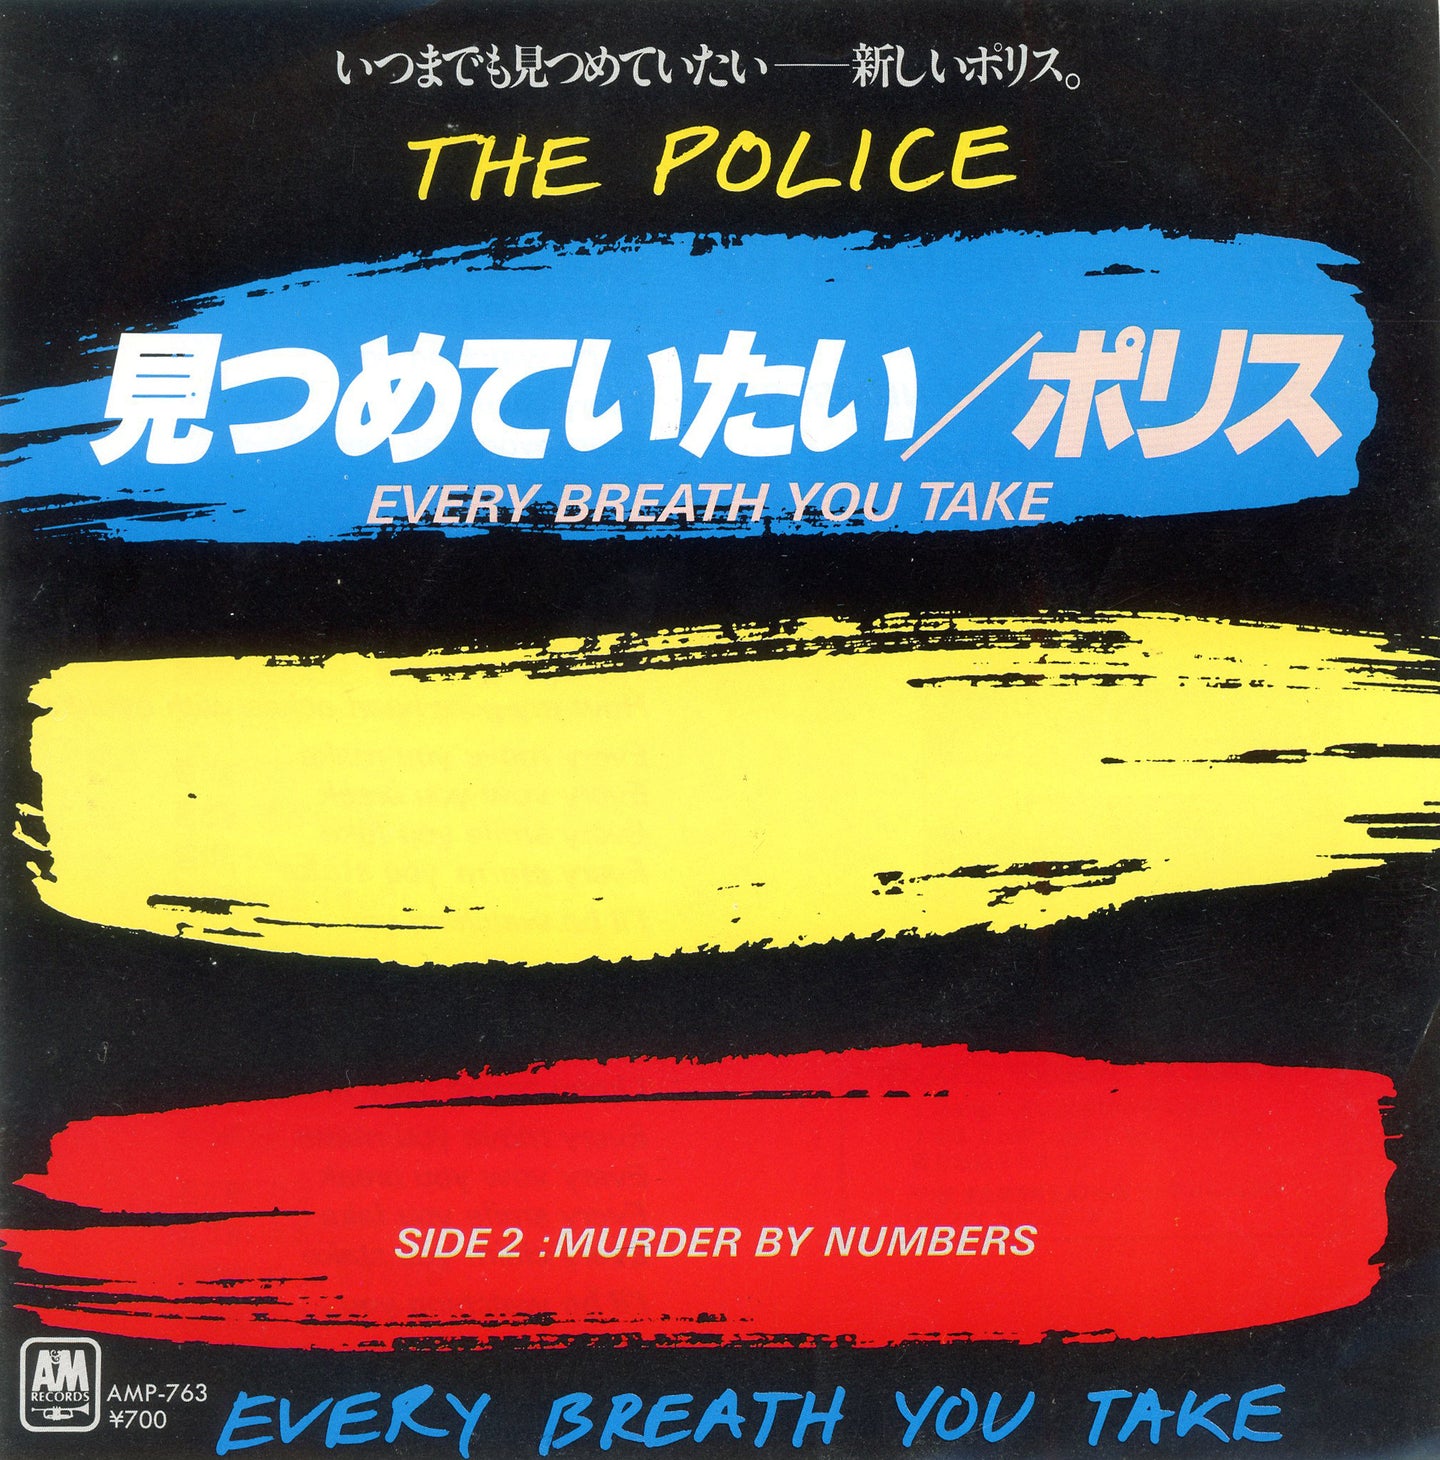 The Police - Every Breath You Take / Murder By Numbers  7